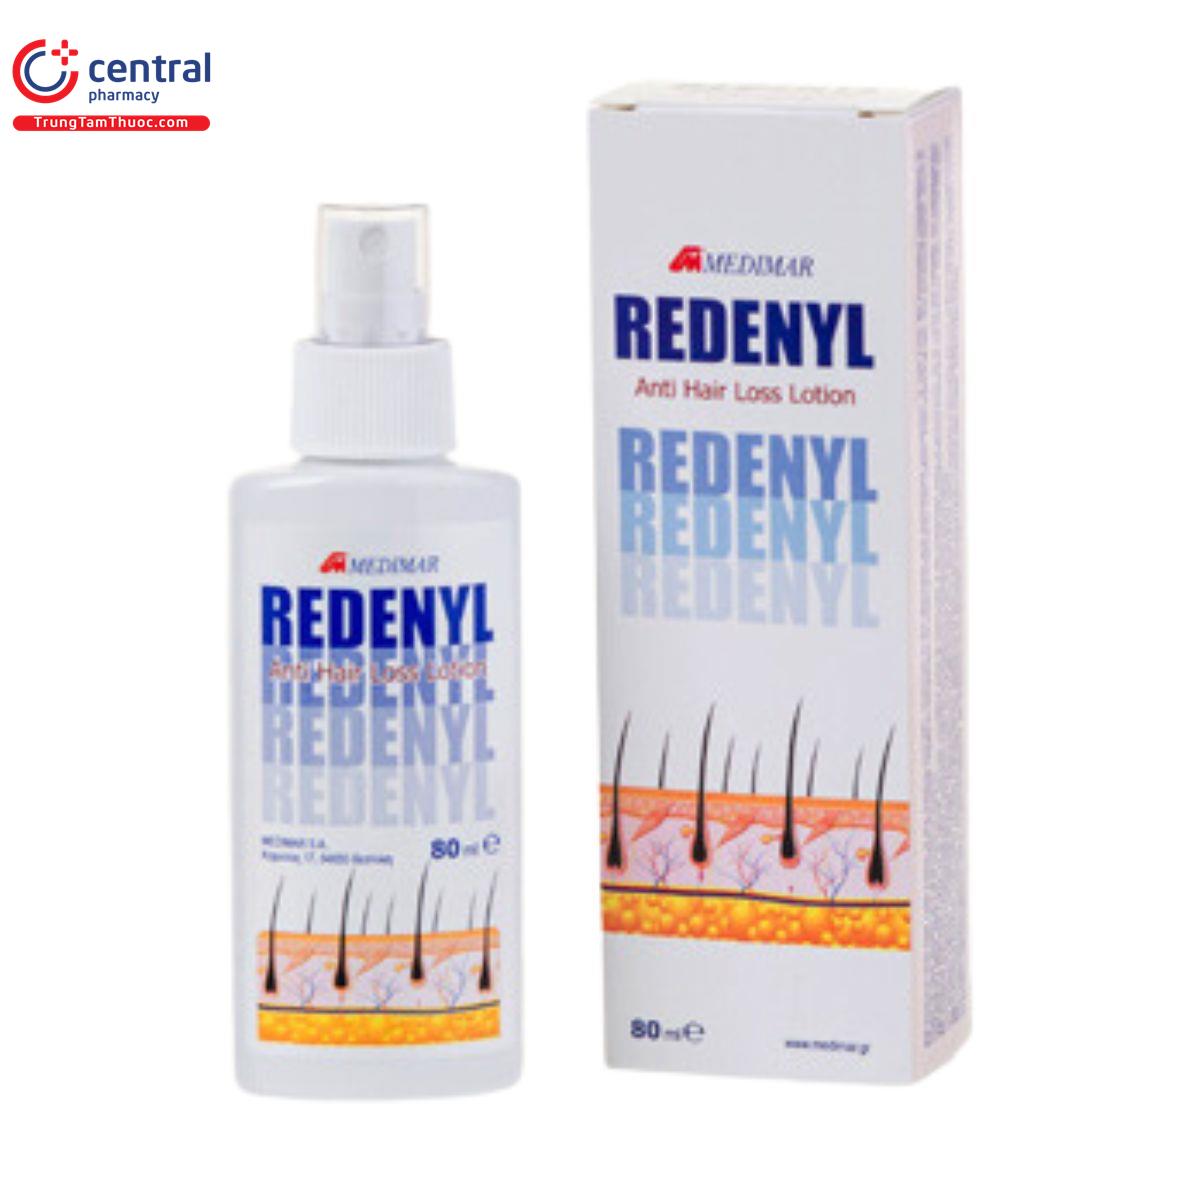 redenyl lotion 2 A0766